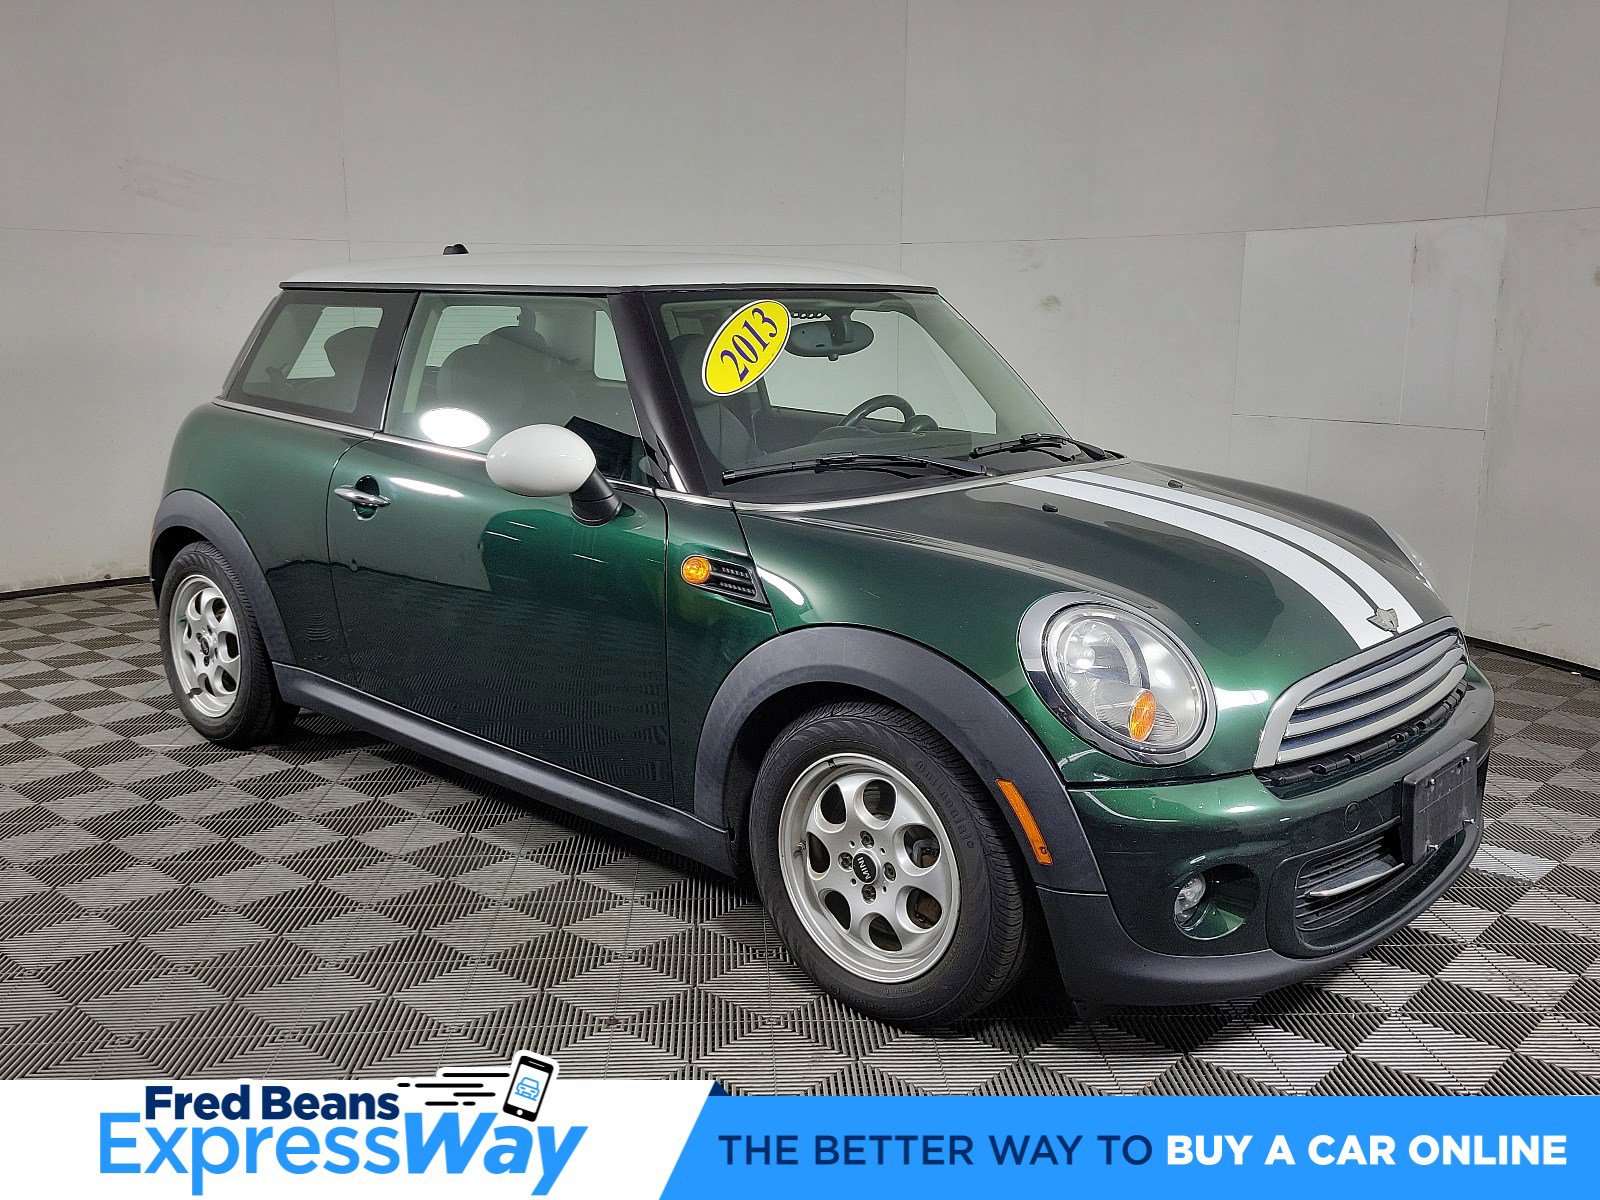 Used 2013 MINI Cooper Hardtop For Sale at Fred Beans Hyundai of